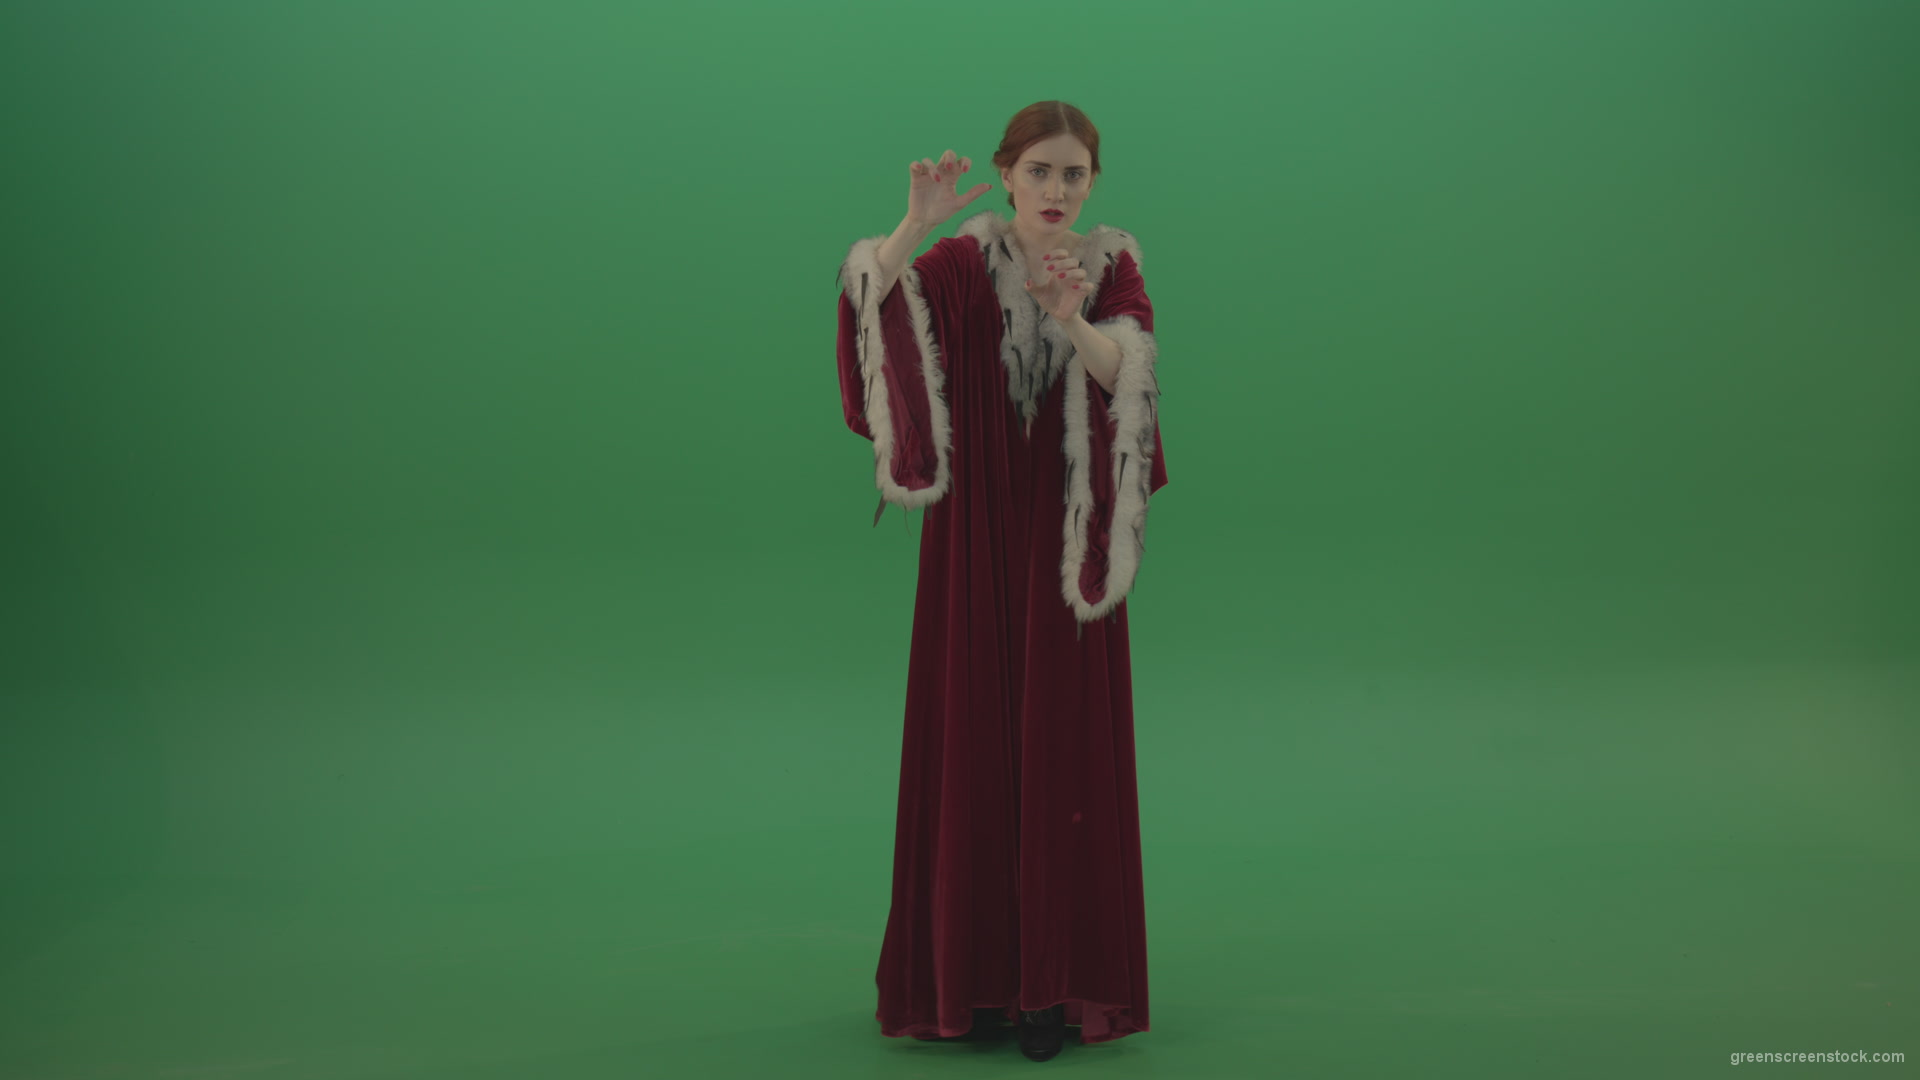 Witch-holds-back-the-magic-barrier-with-its-wittic-power_009 Green Screen Stock